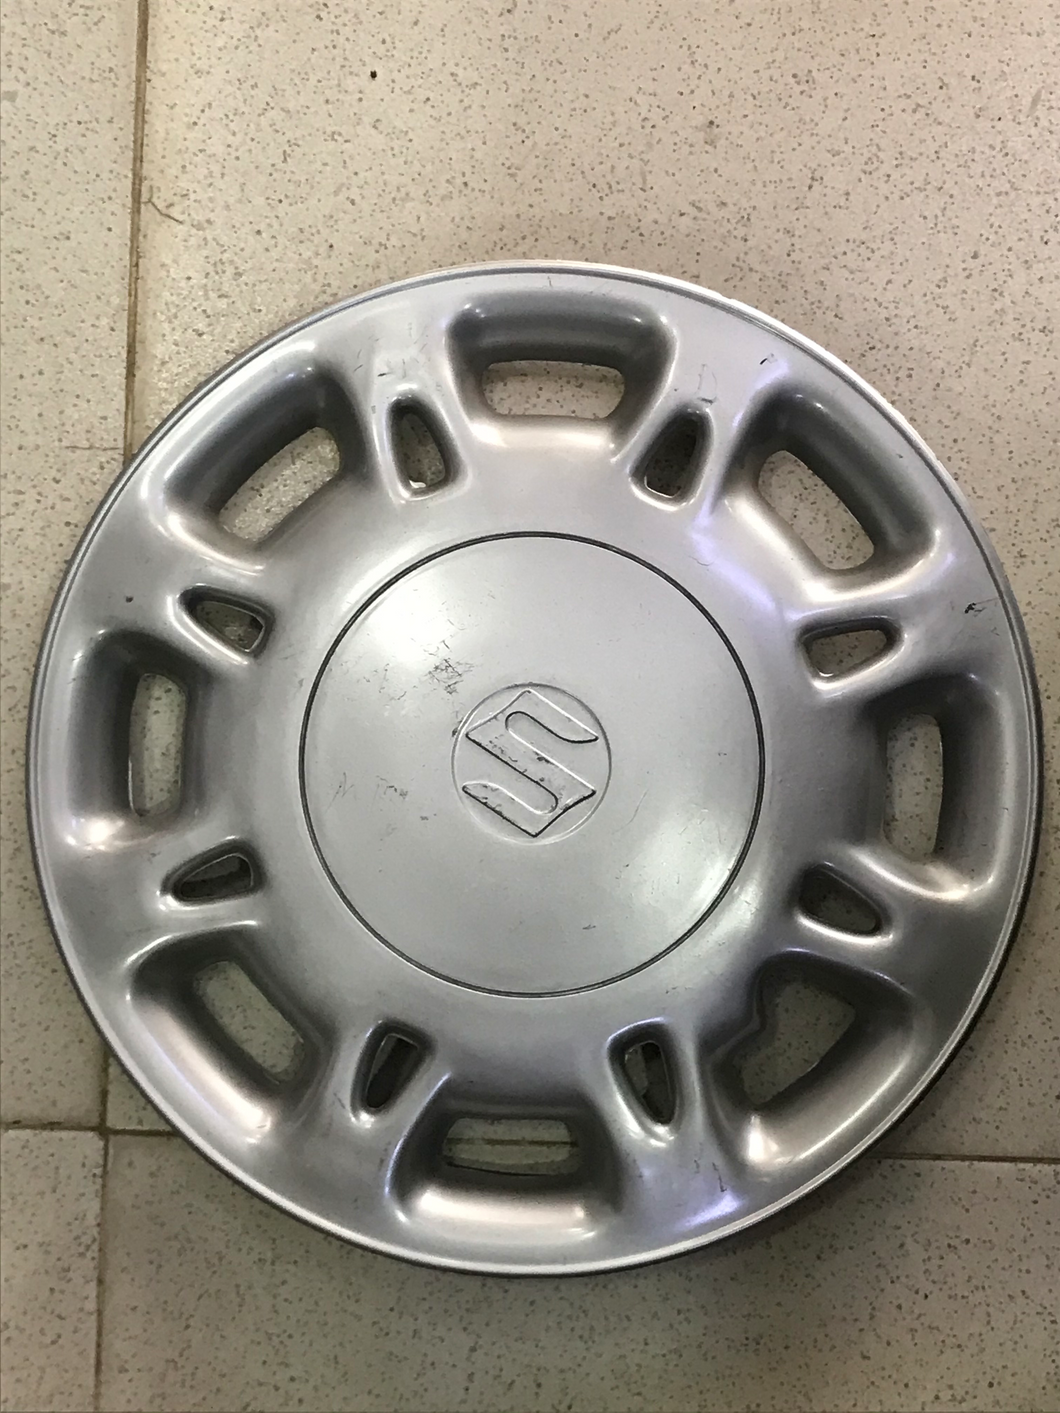 Wheel Cap 12 inch size suitable for all cars having rim size 12 (Best fit in Suzuki Mehran)